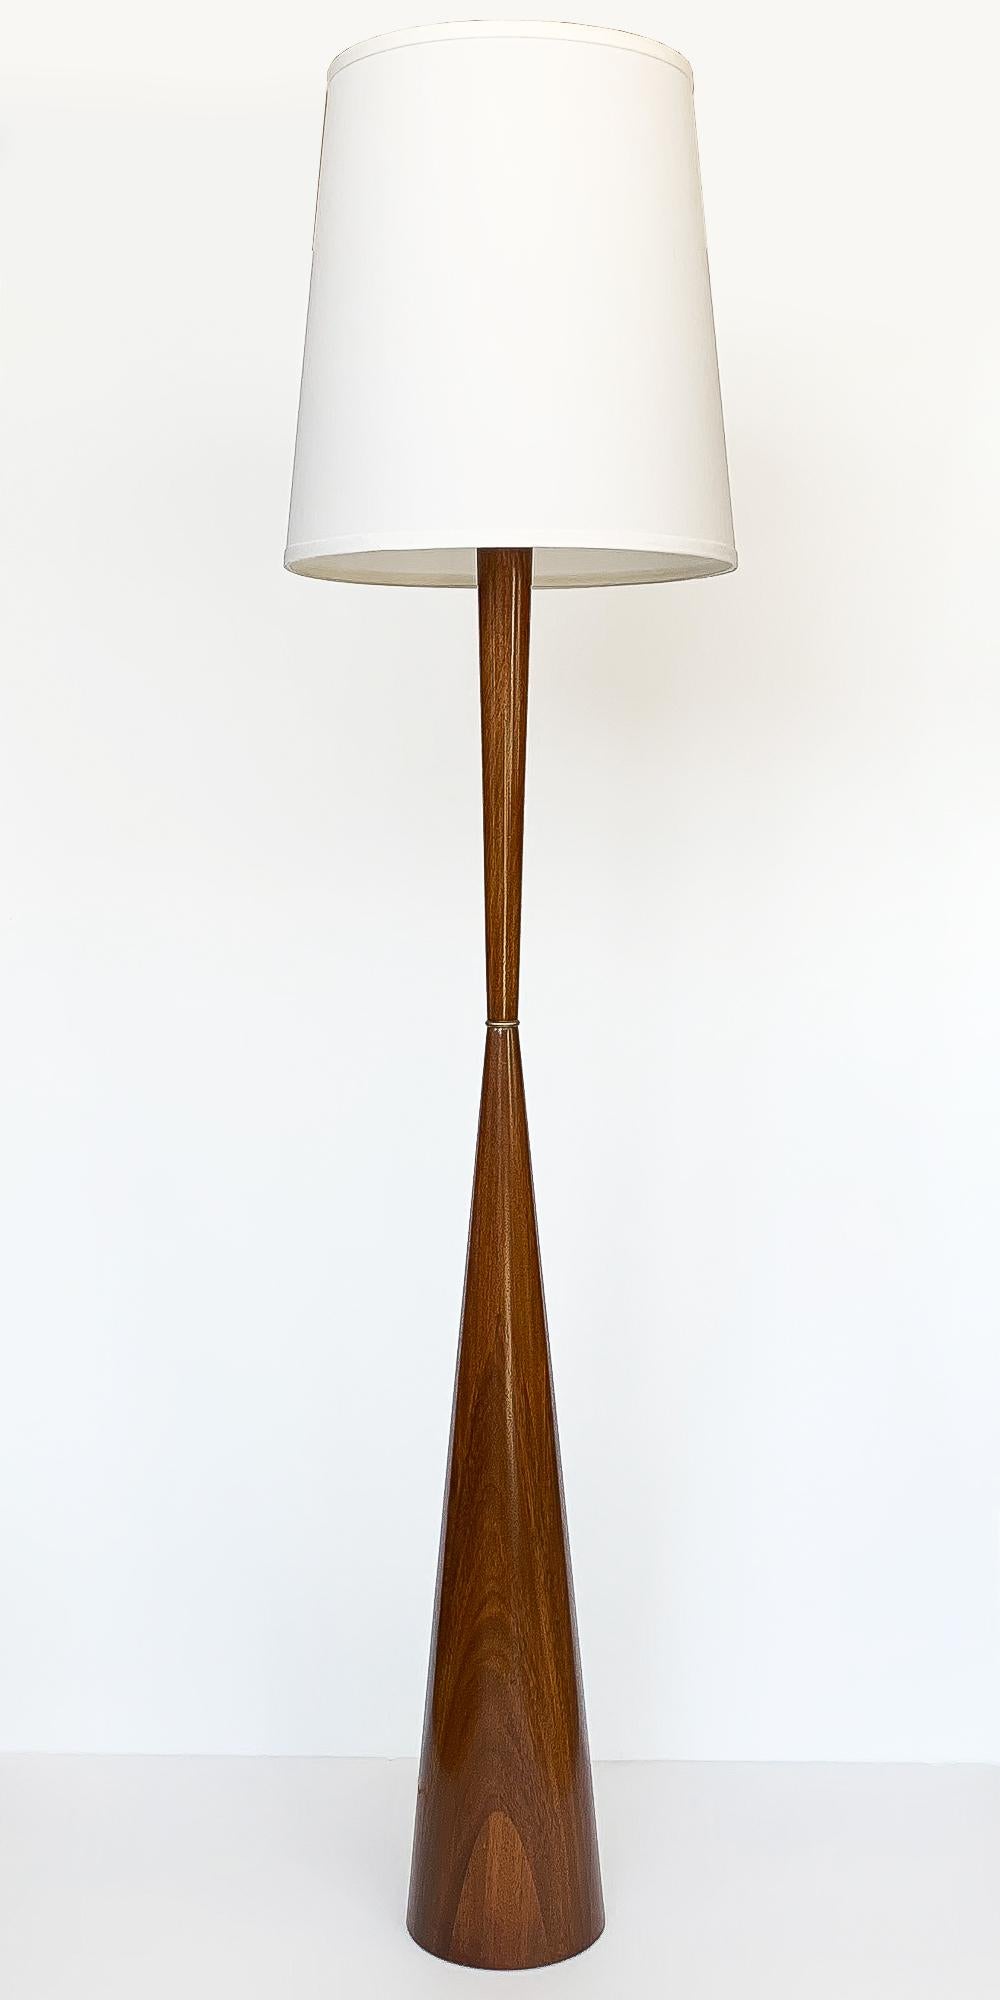 Solid walnut hourglass shaped floor lamp in the style of Raymond Pfenning and Phillip Llyod Powell, circa 1970s. Hand-turned solid walnut floor lamps with brass insert on neck. Brass socket, harp and ball finial. Takes one standard base light bulb.